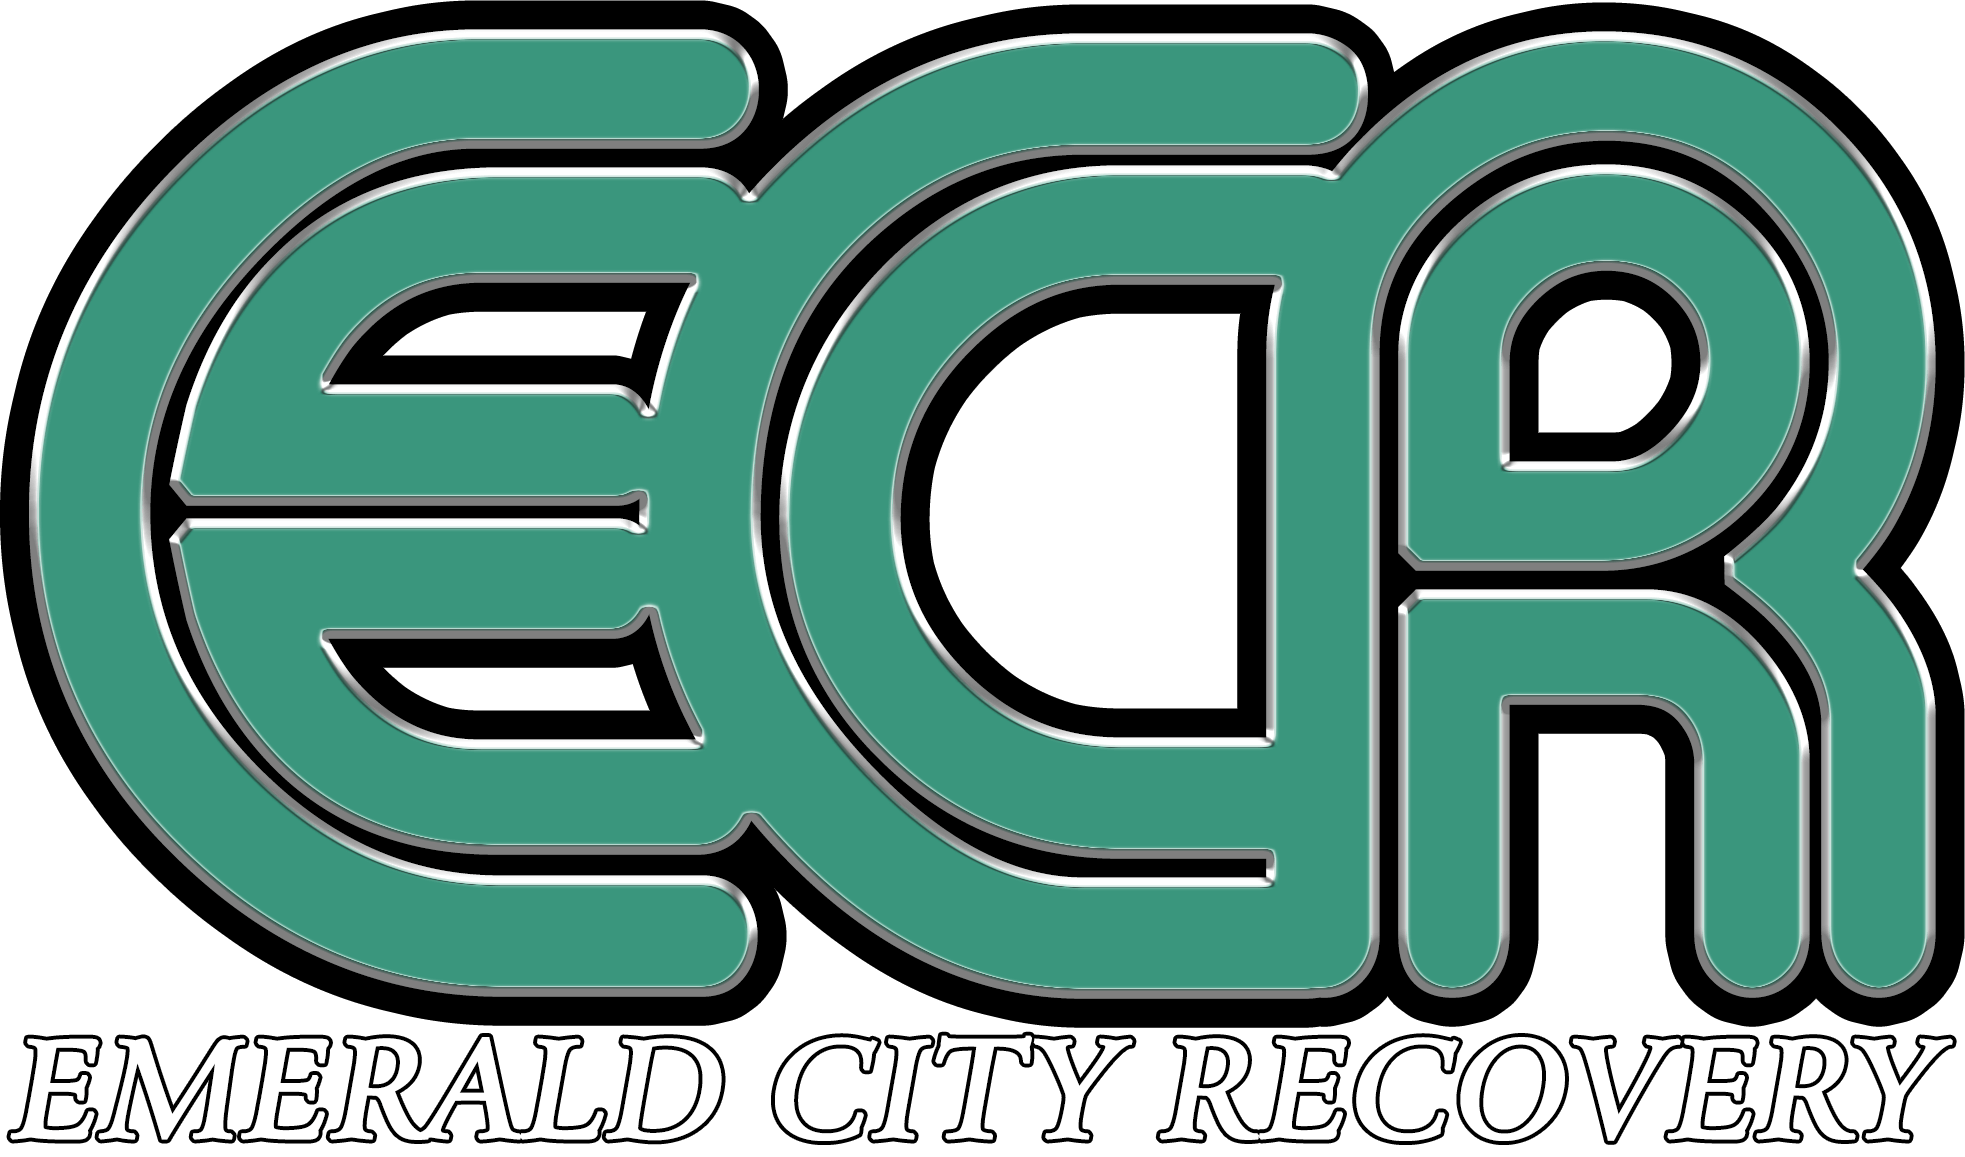 Emerald City Recovery - Professional Repossession Services in Washington state!